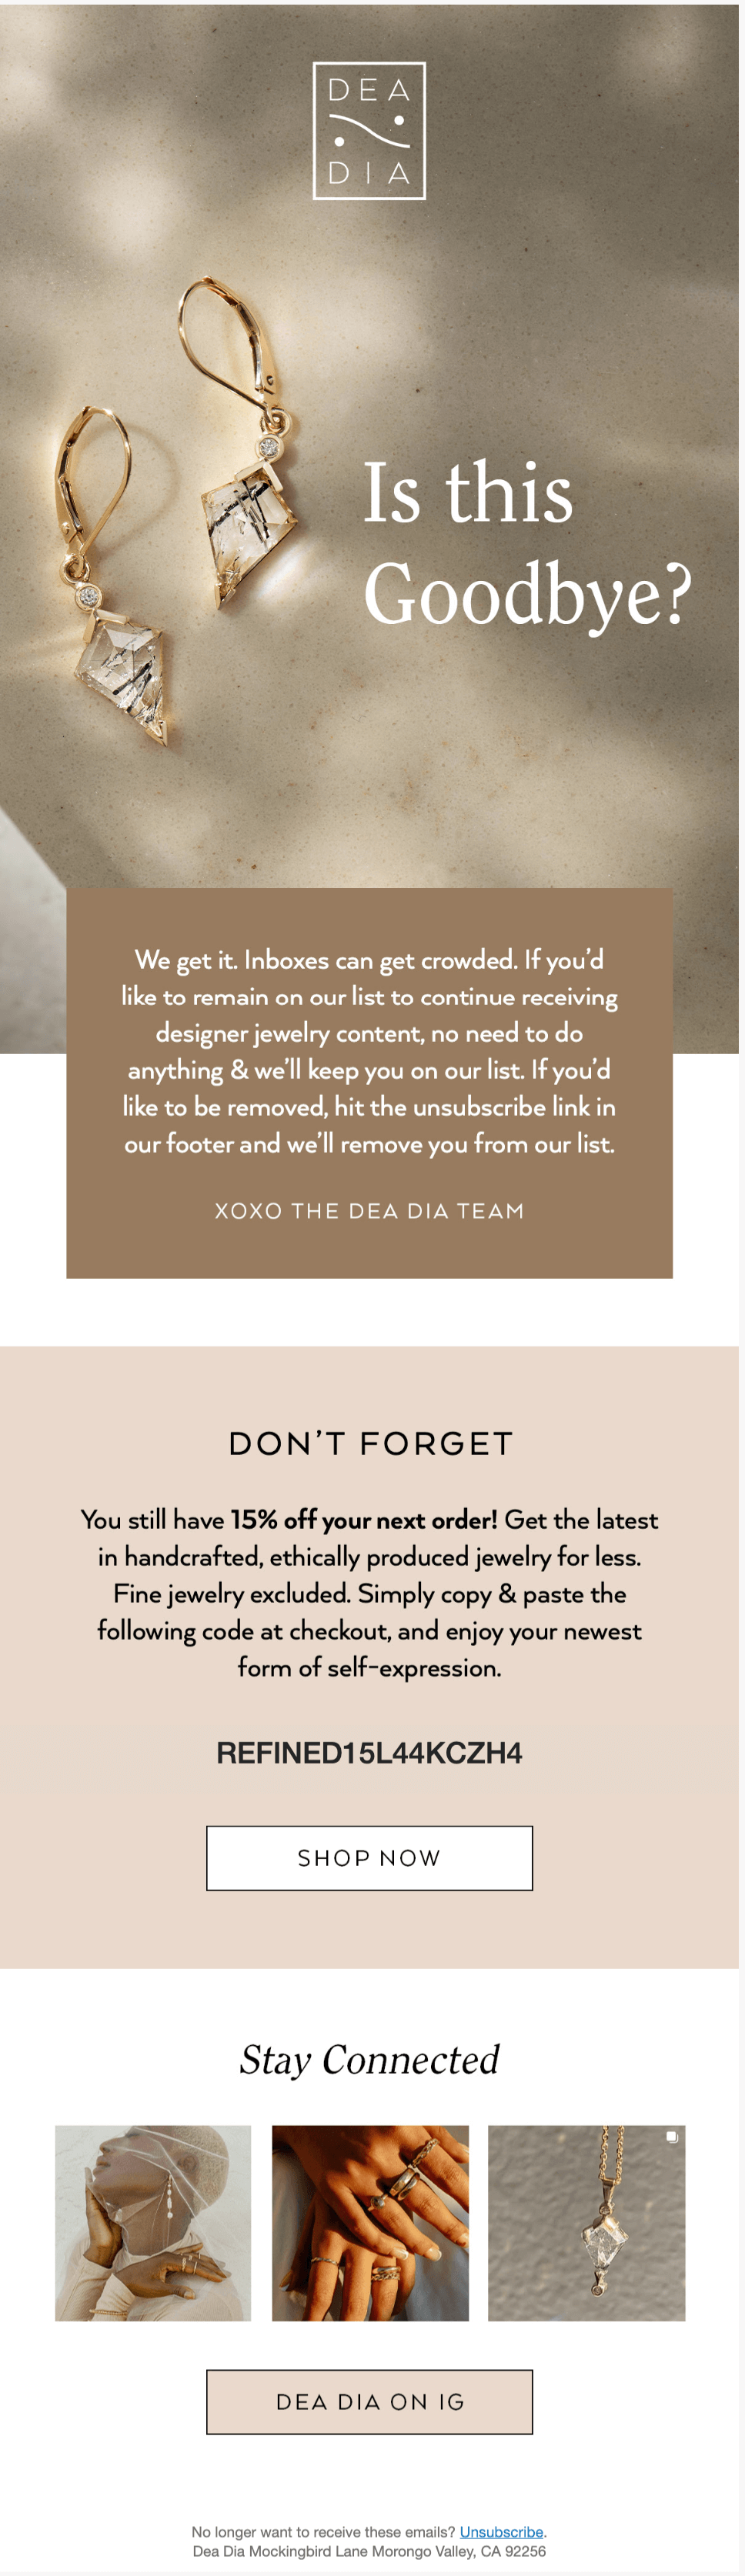 Image shows a sunset email from jewelry brand Dea-Dia, giving instructions on how to unsubscribe, and offering a 15% discount on the next order. 